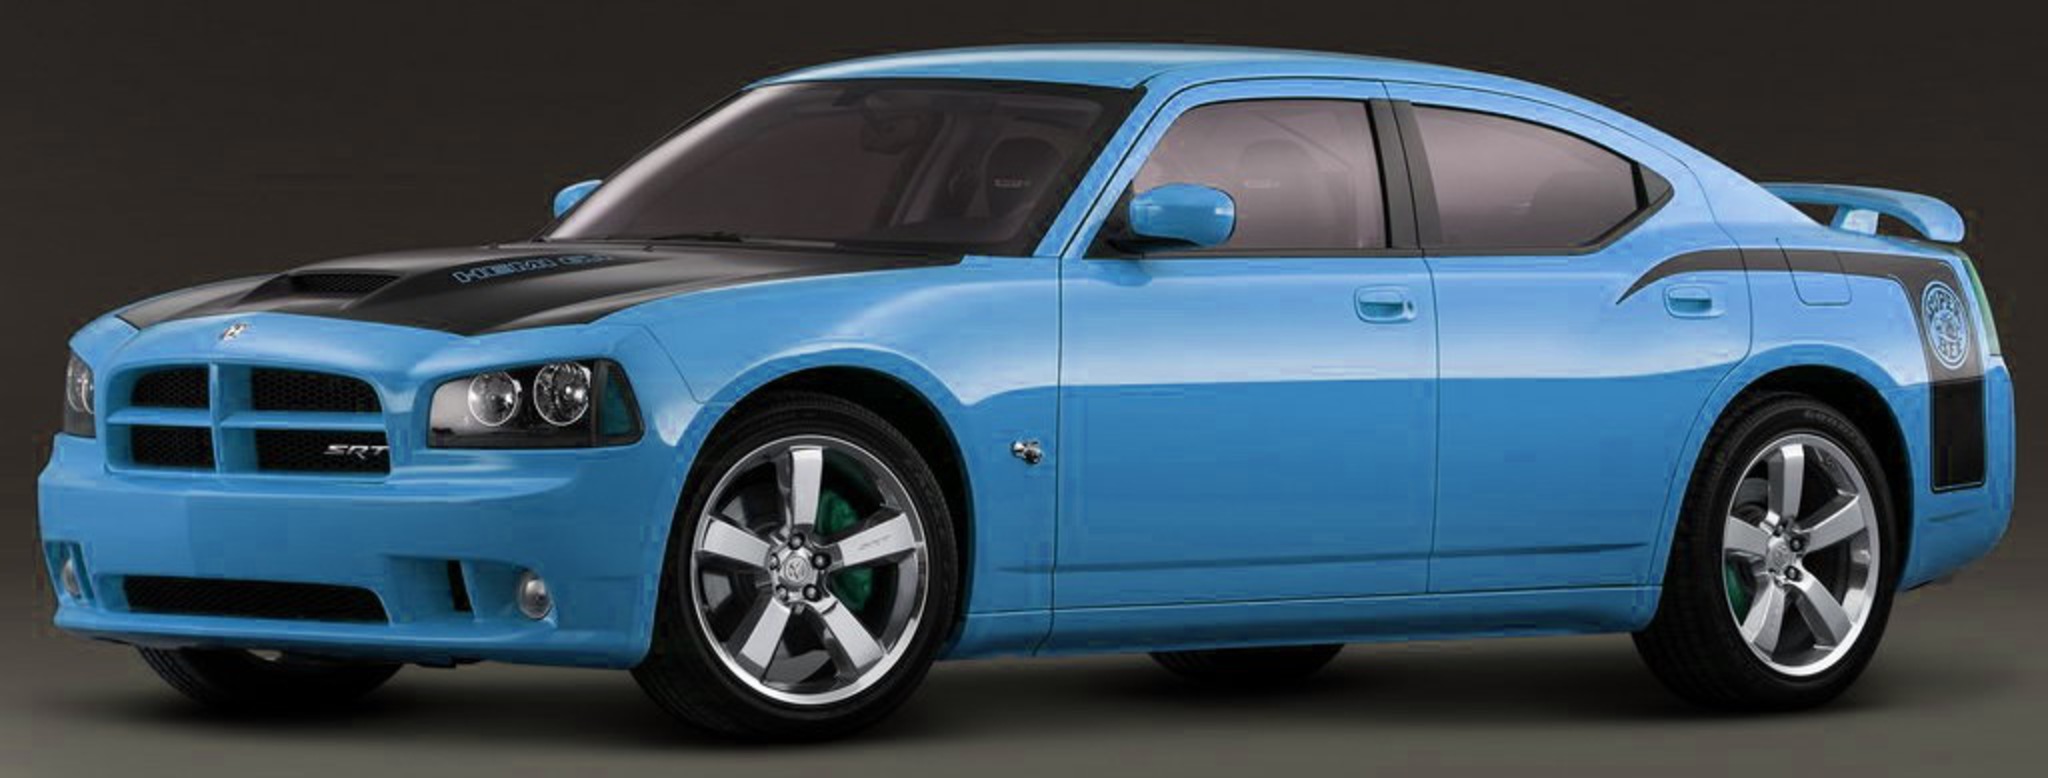 Dodge Charger SRT10 Super Bee. View Download Wallpaper. 1024x389. Comments